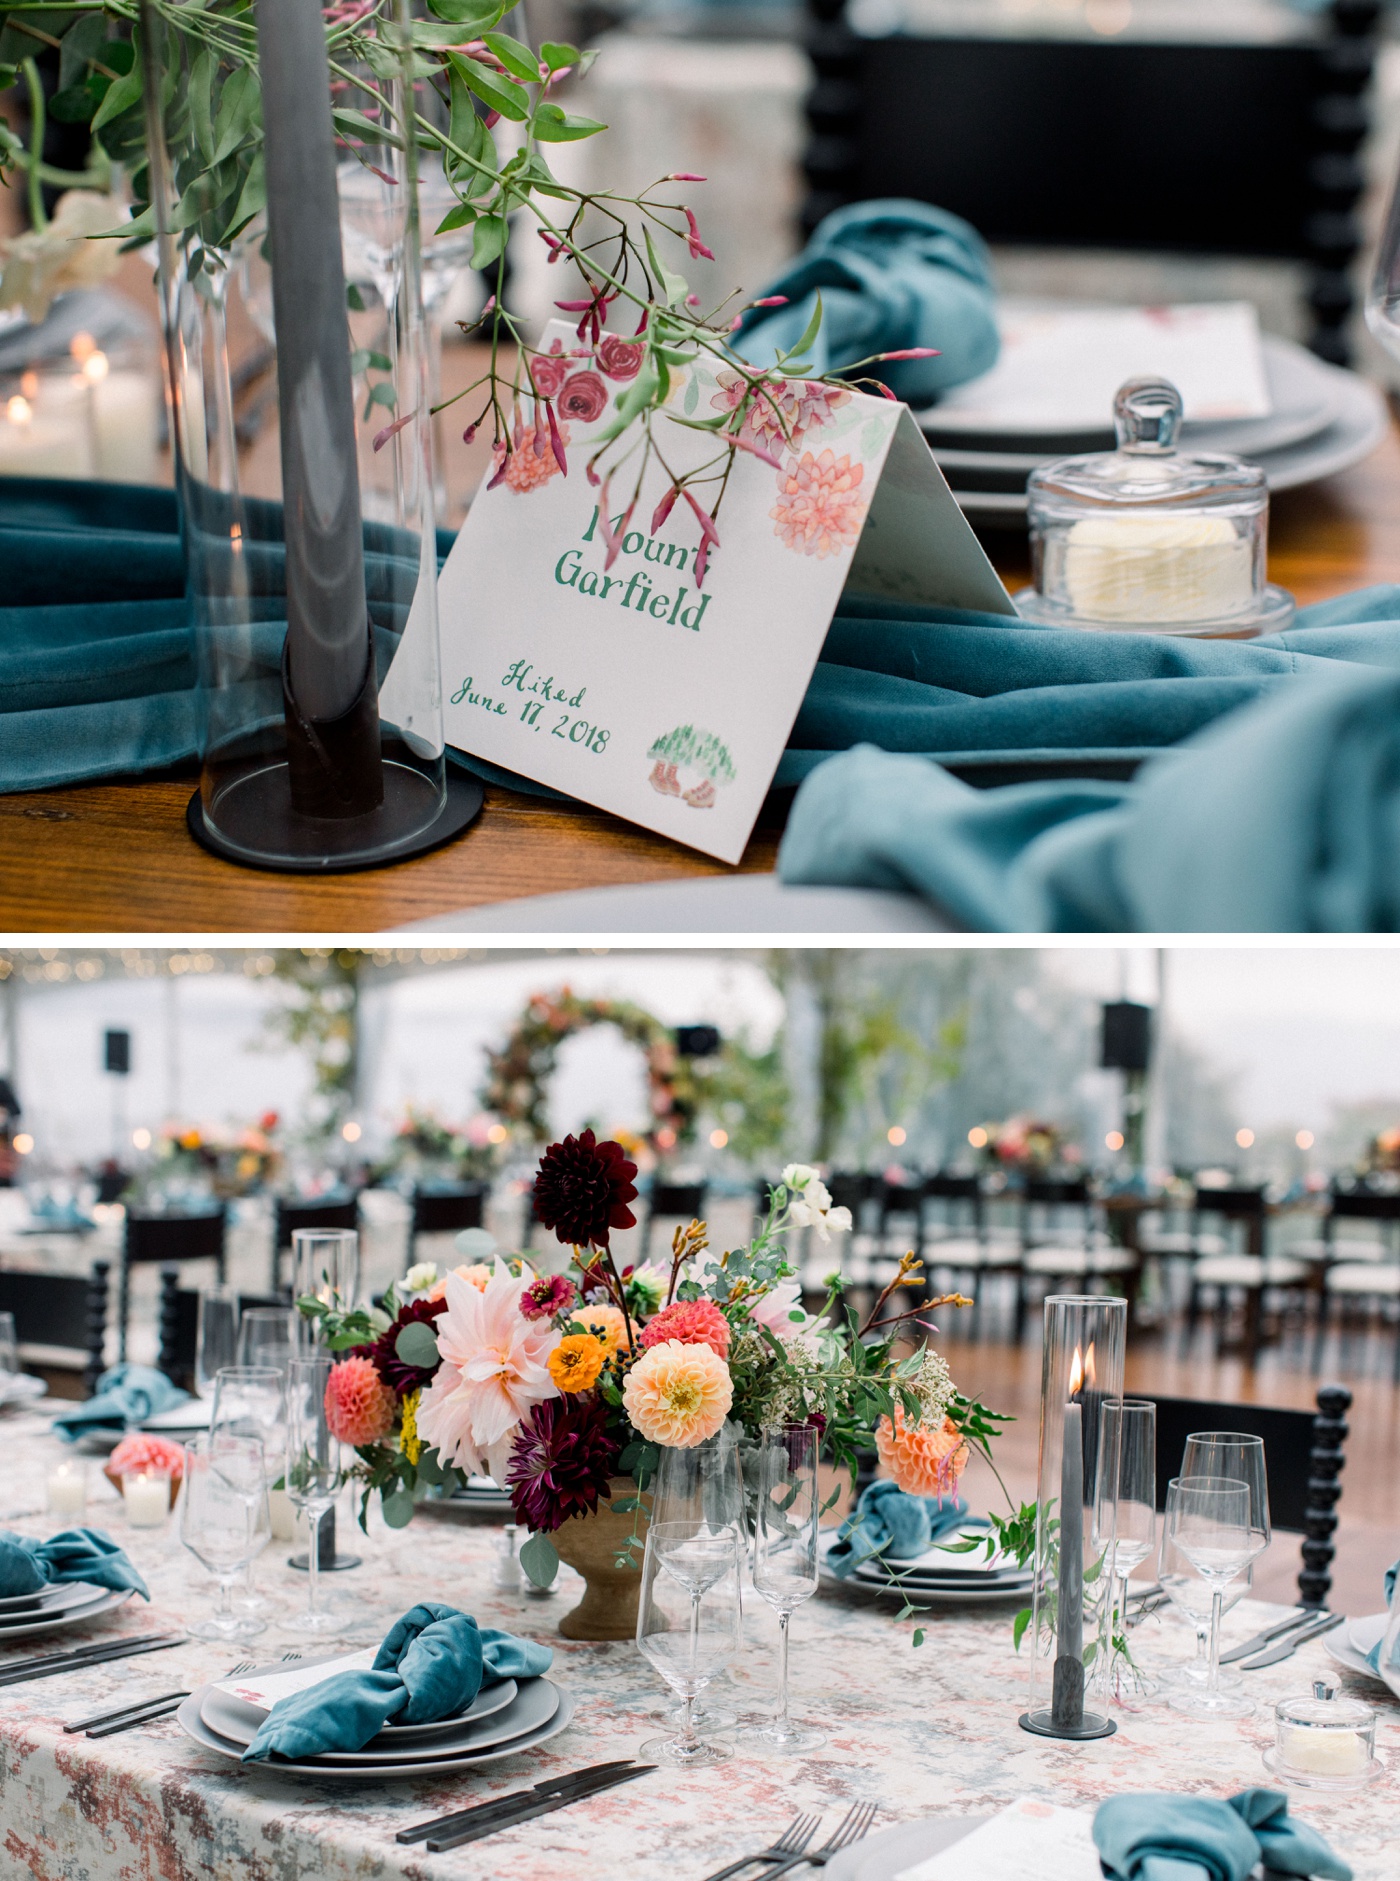 Wedding reception tables named after mountains climbed by the bride and groom